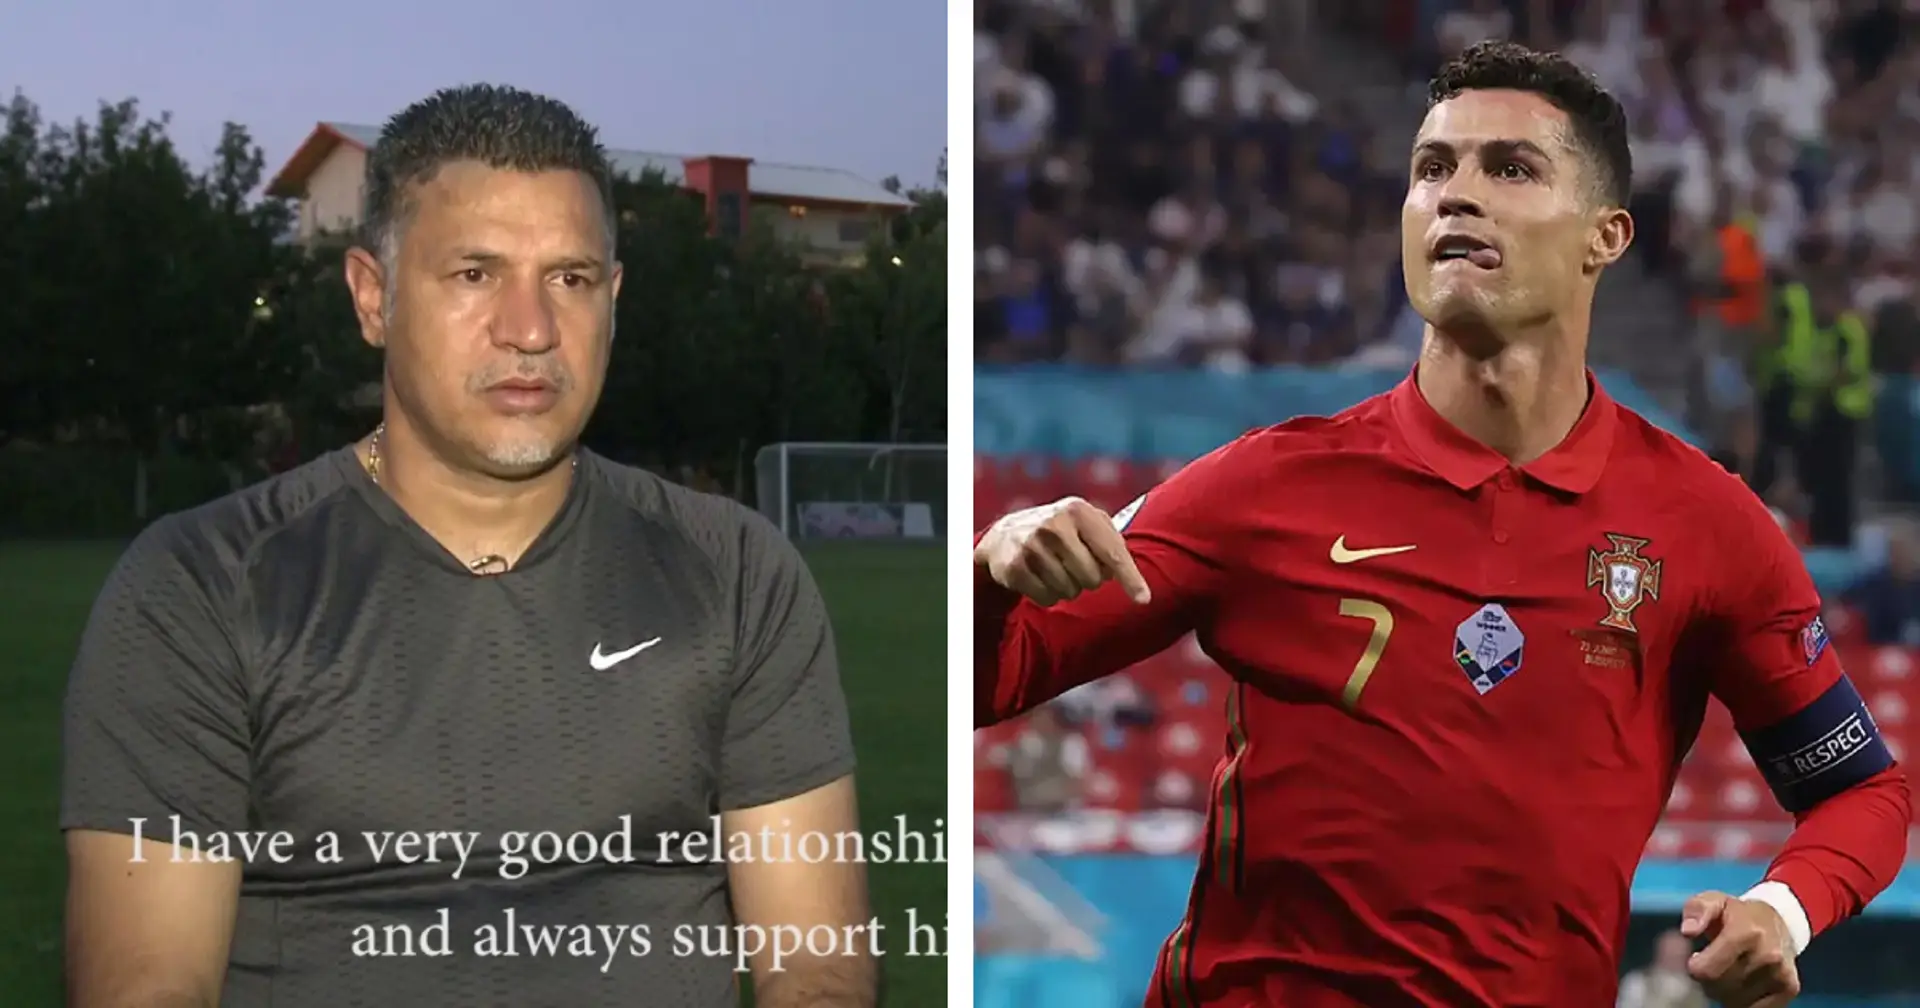 Iran legend Ali Daei speaks out after Cristiano Ronaldo matches his national team goals record